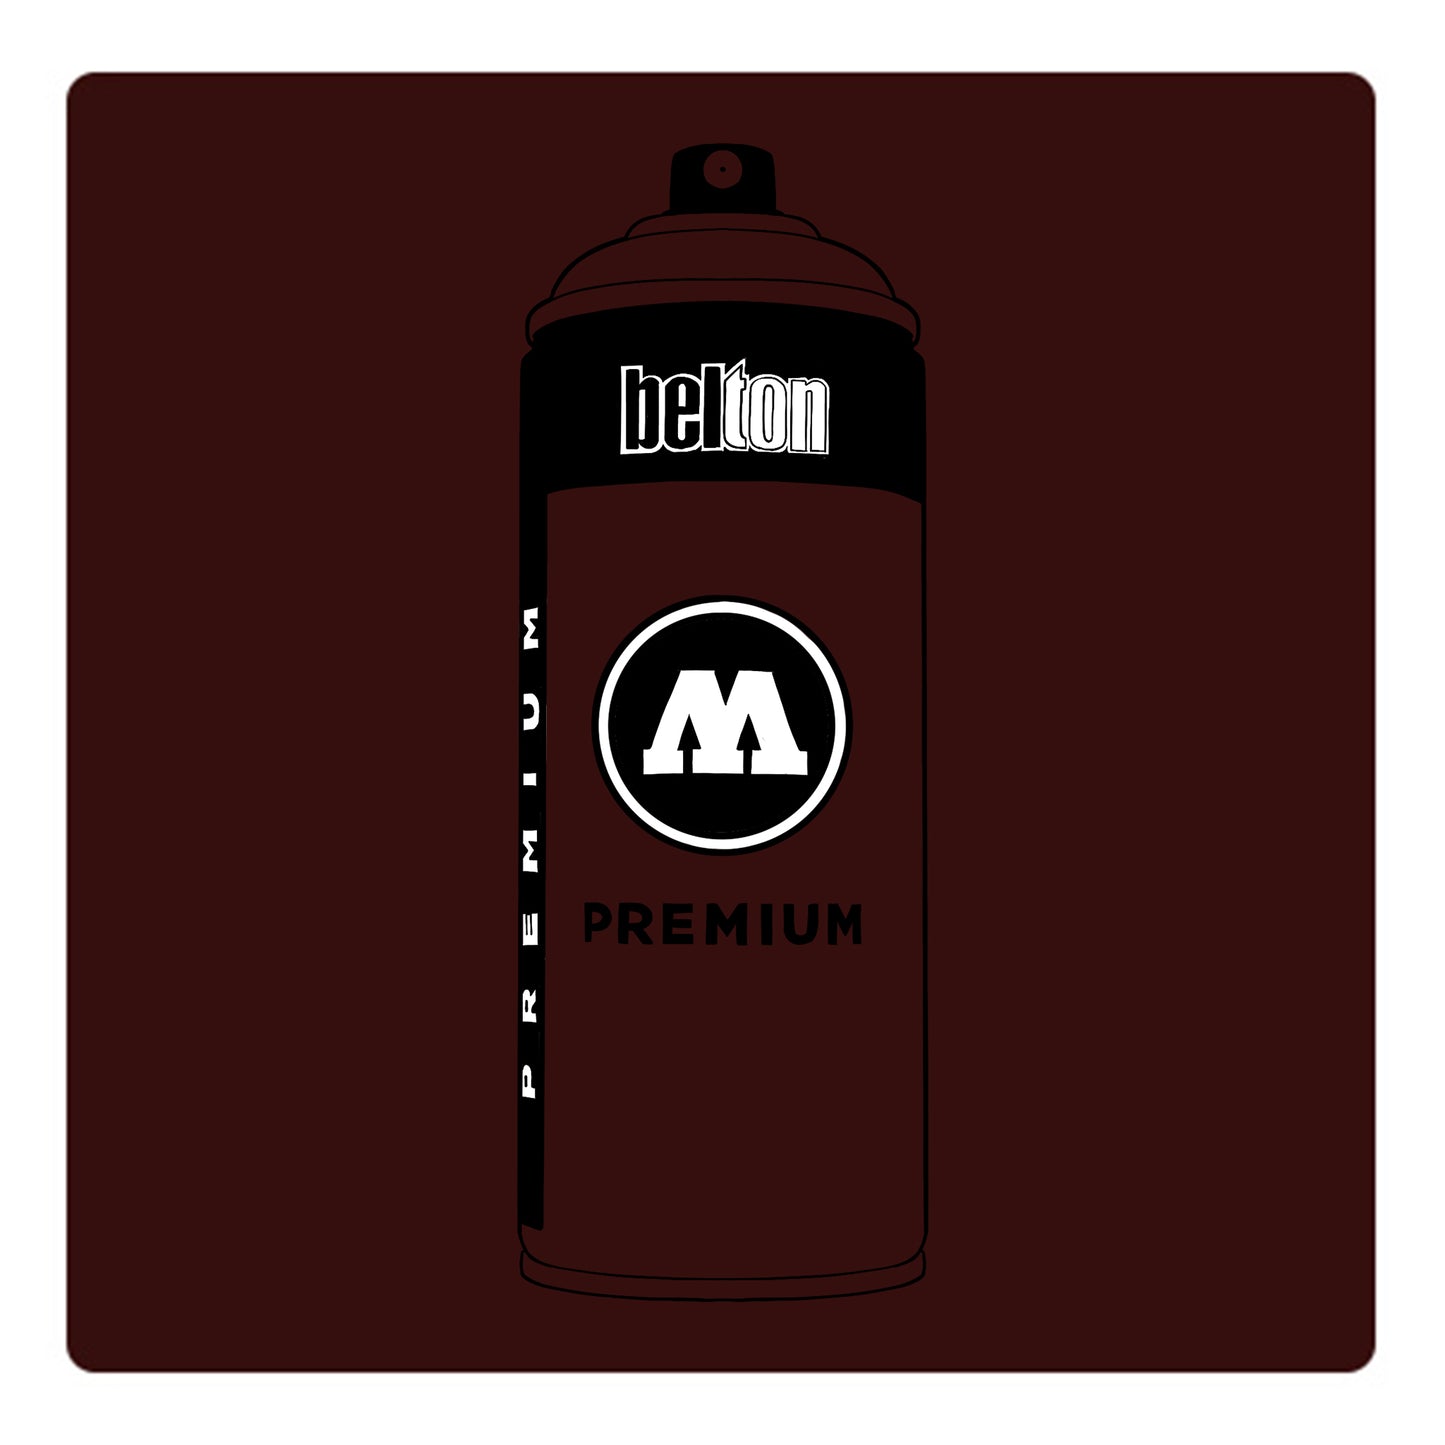 A black outline drawing of a dark red brown spray paint can with the words "belton","premium" and the letter"M" written on the face in black and white font. The background is a color swatch of the same dark red brown with a white border.